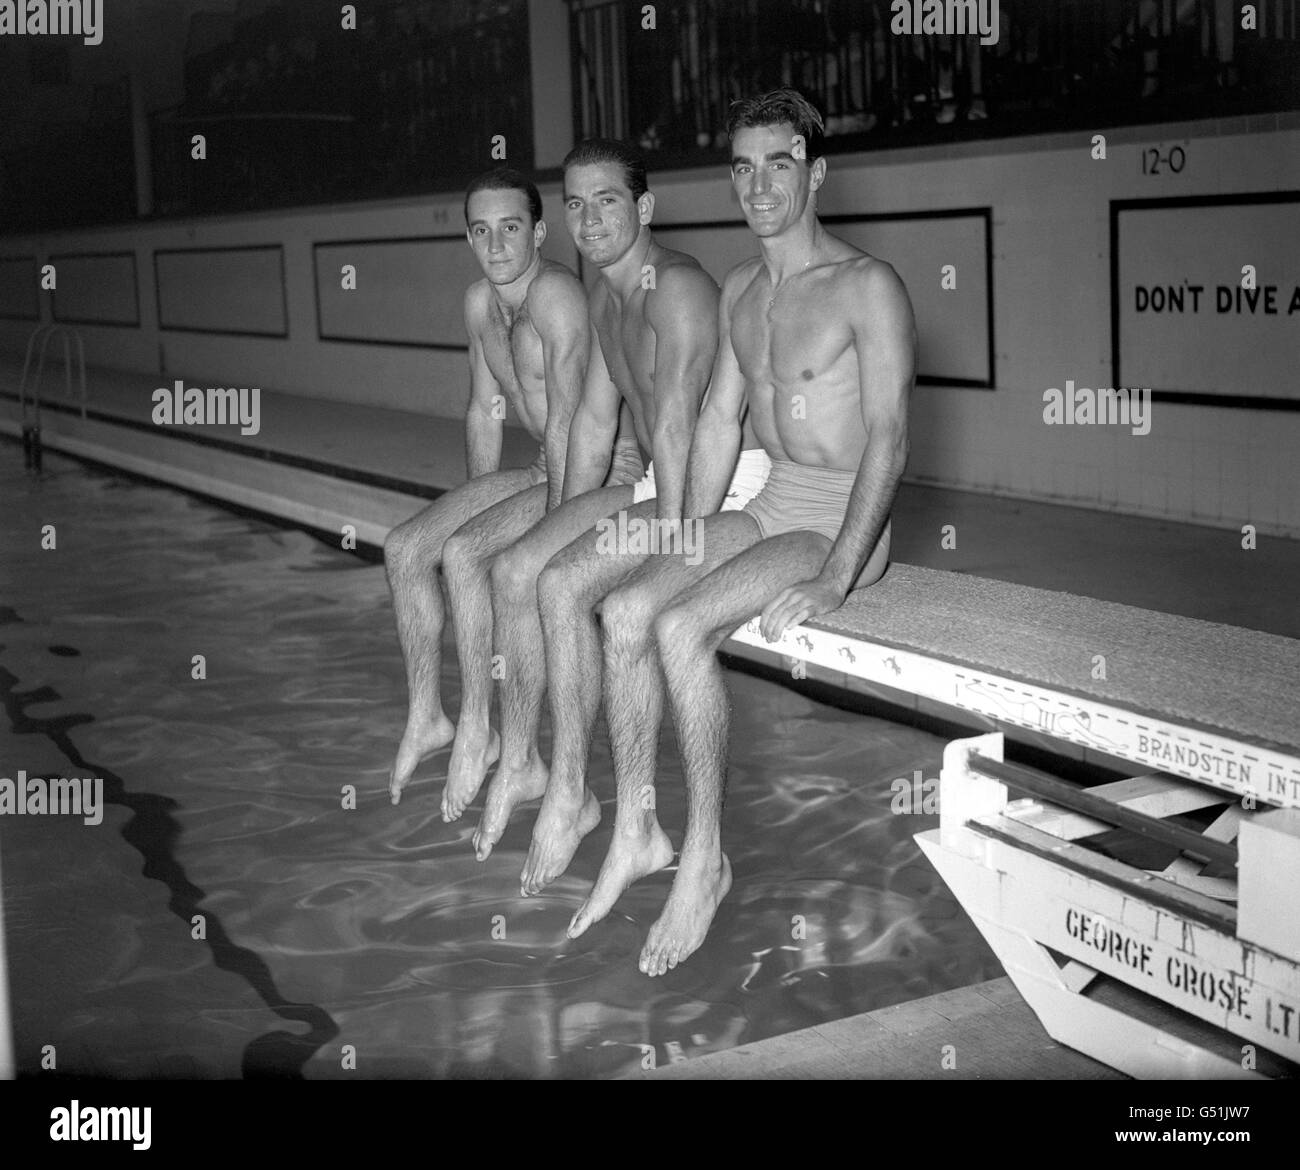 Diving - Mexico Olympic Diving Team - York Hall, London. Members of the Mexico diving team. (l-r) Joaquin Capilla, Gustavo Somohand and Diego Mariscal. Stock Photo